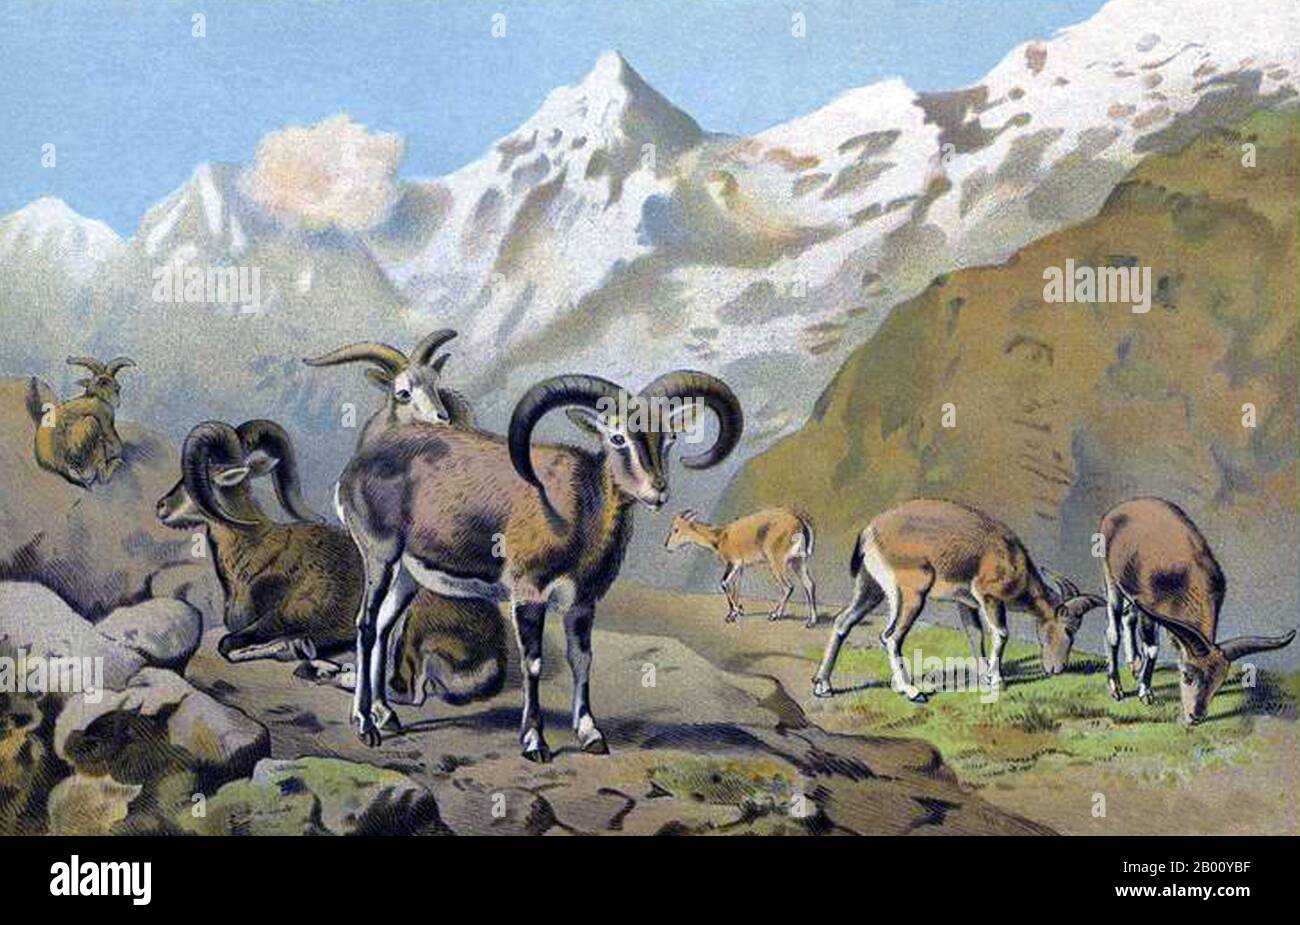 China/Tibet: Bharal or Himalayan Blue Sheep (Pseudois nayaur). Chromolithograph print by Pierre Jacques Smit (1863-1960), 1901.  The bharal or Himalayan blue sheep, Pseudois nayaur, is a caprid found in the high Himalayas of Nepal, Tibet, China, India, Pakistan, and Bhutan. Its native names include bharal, bharar and bharut in Hindi, Na or Sna in Ladakh, Nervati in Nepali and Nao or Gnao in Bhutan. The bharal has horns that grow upwards, curve out and then towards the back, somewhat like an upside down moustache. Stock Photo